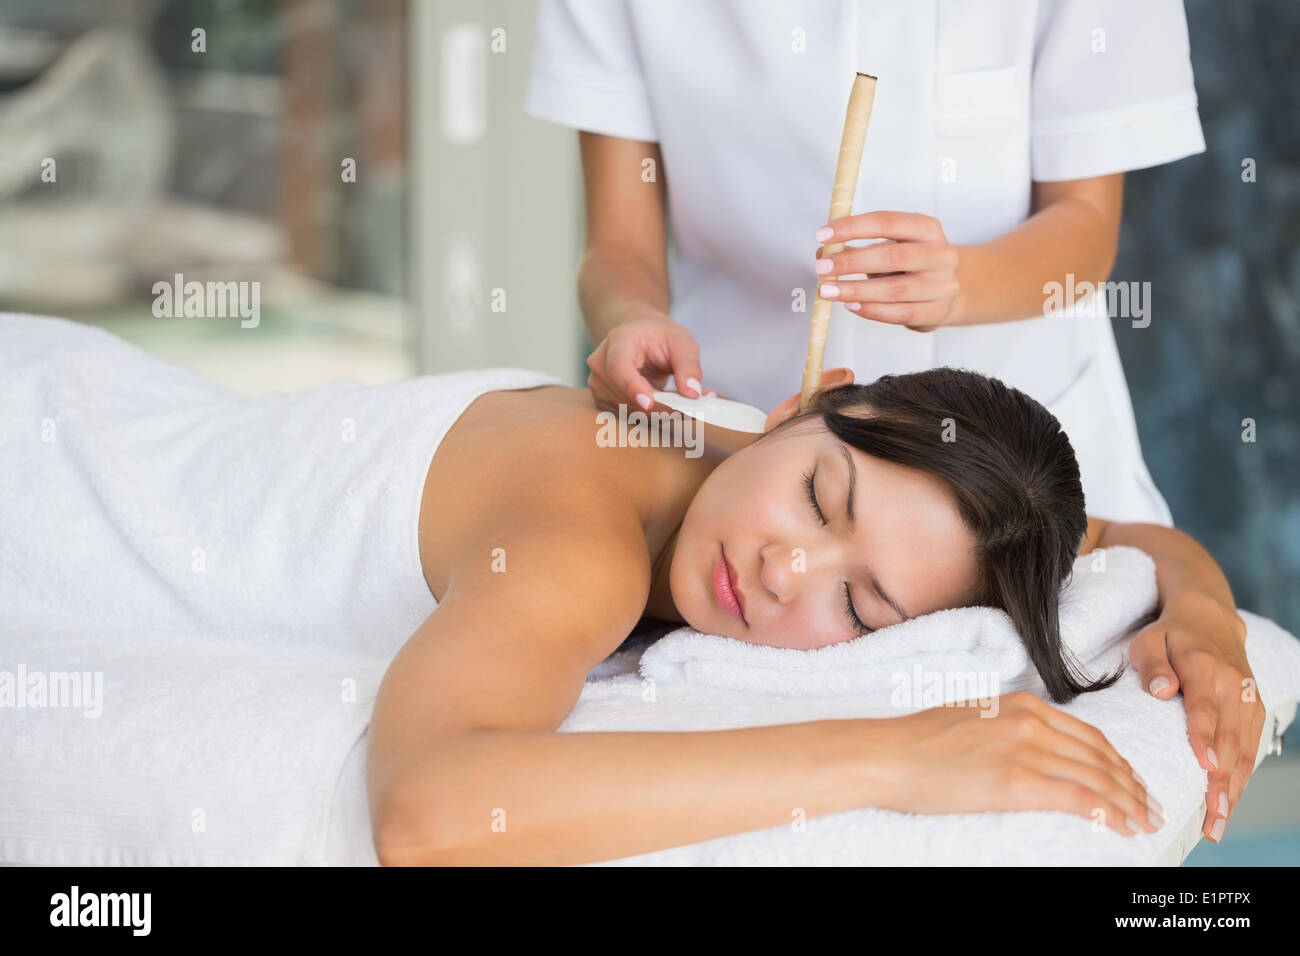 Relaxed brunette getting an ear candling treatment Stock Photo